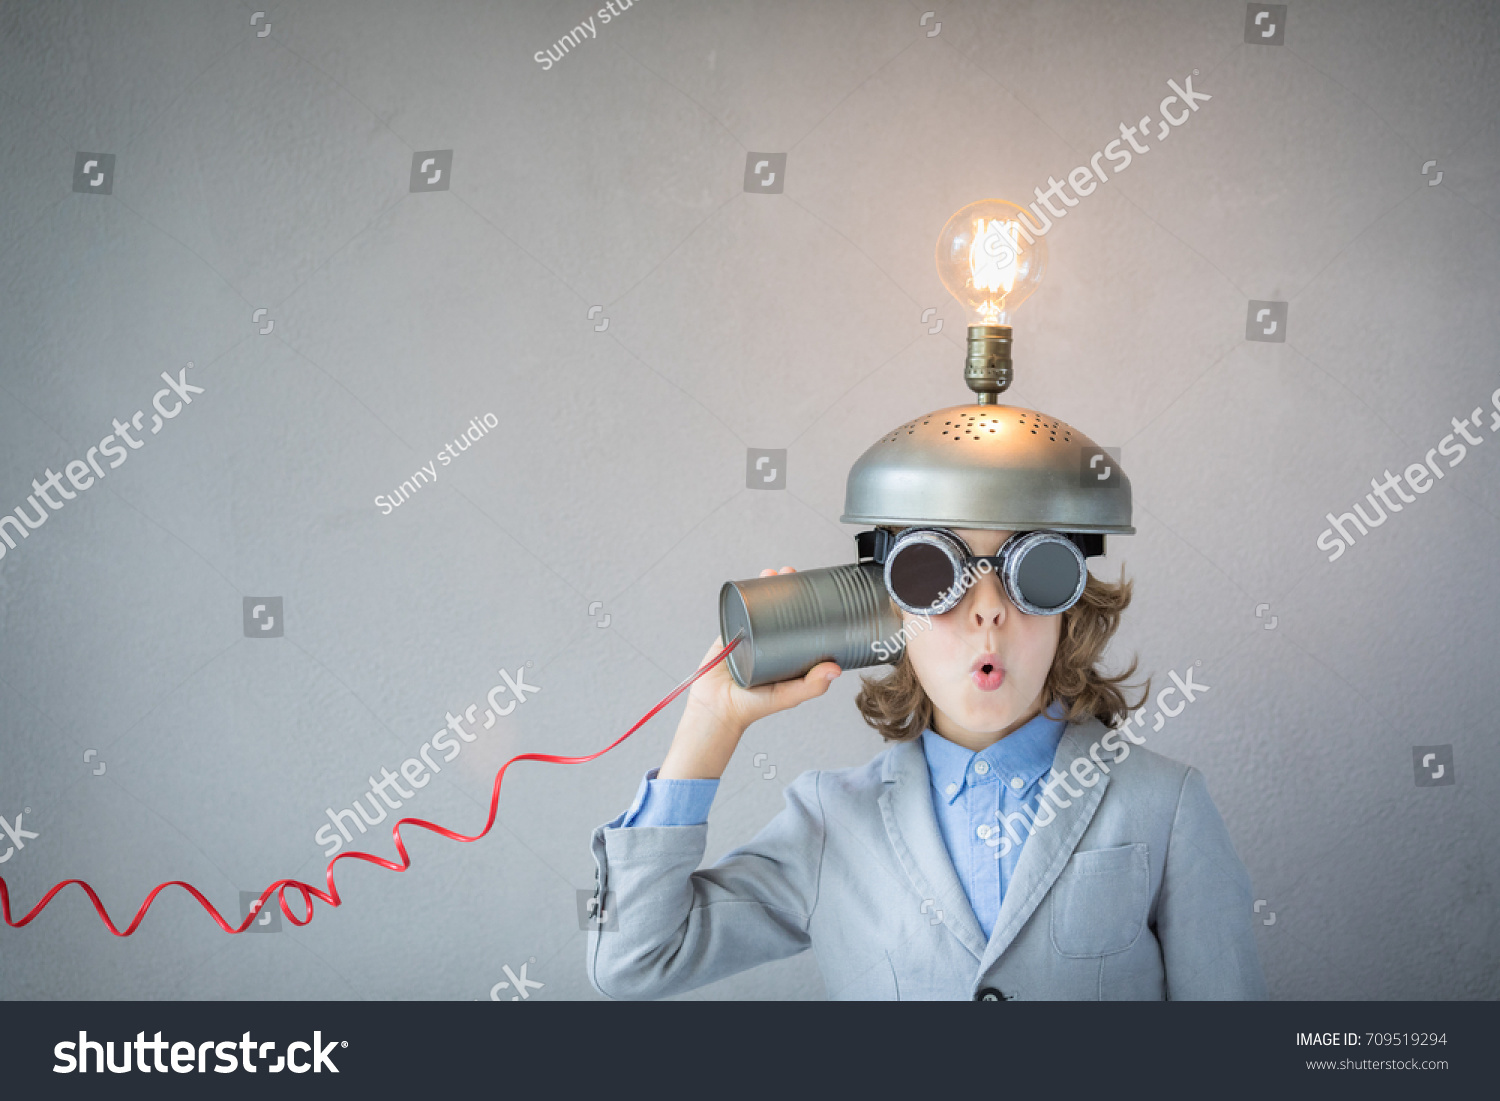 Portrait of child in classroom. Child with toy virtual reality headset in class. Funny kid with light bulb. Communication, idea and innovation technology concept. Back to school #709519294